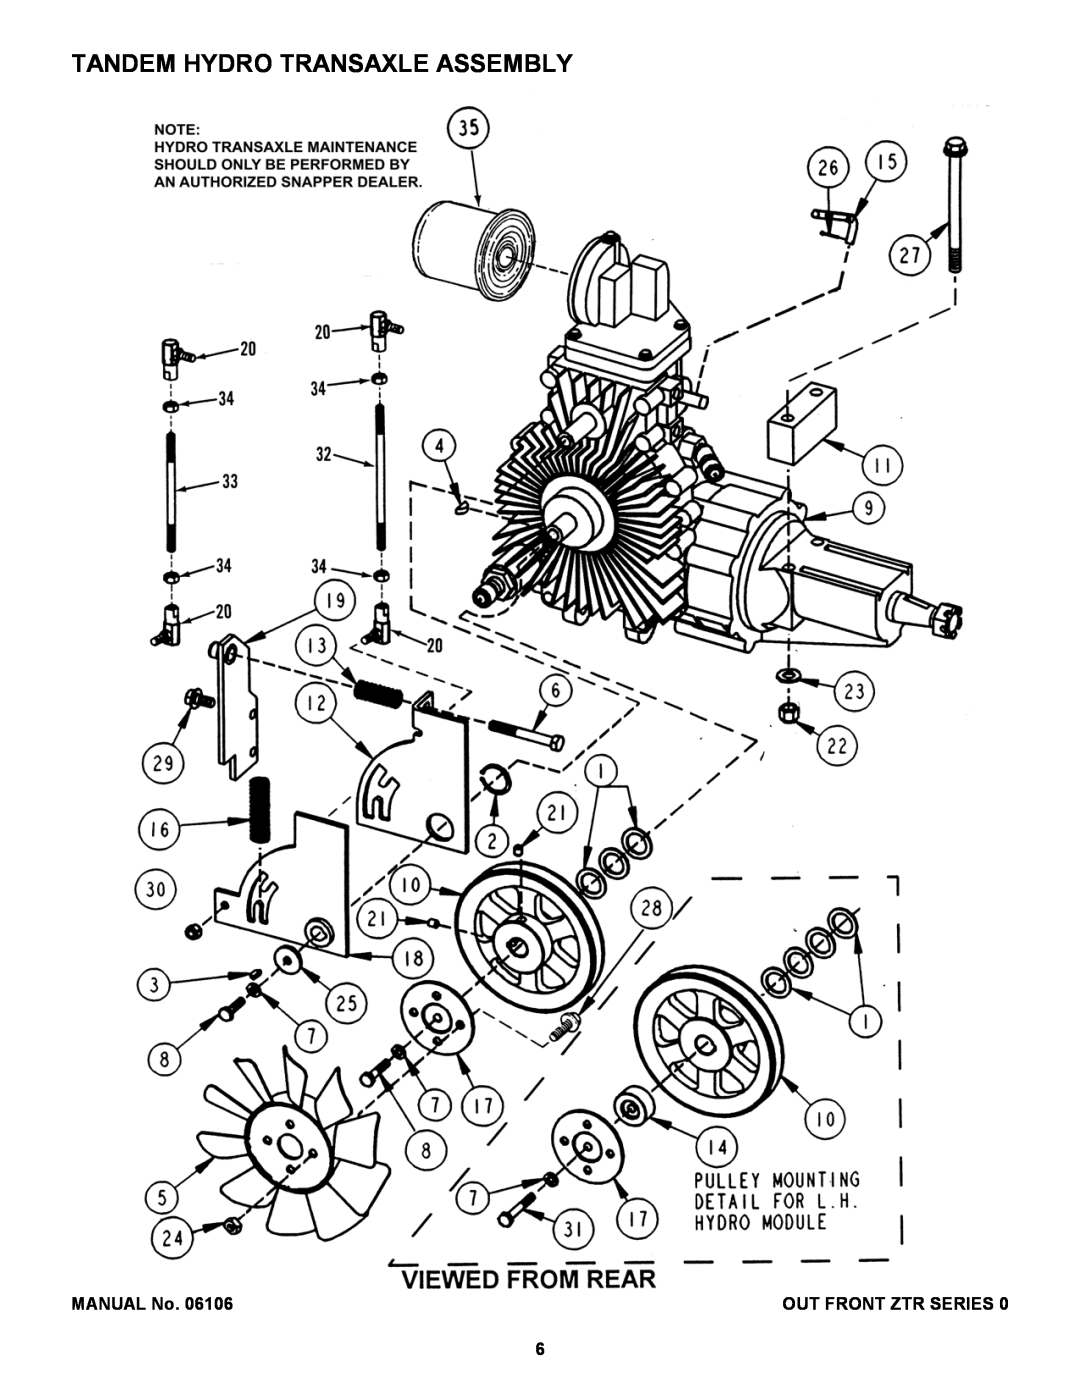 Snapper ZF2500KH, ZF2200K manual Tandem Hydro Transaxle Assembly, MANUAL No, Out Front Ztr Series 